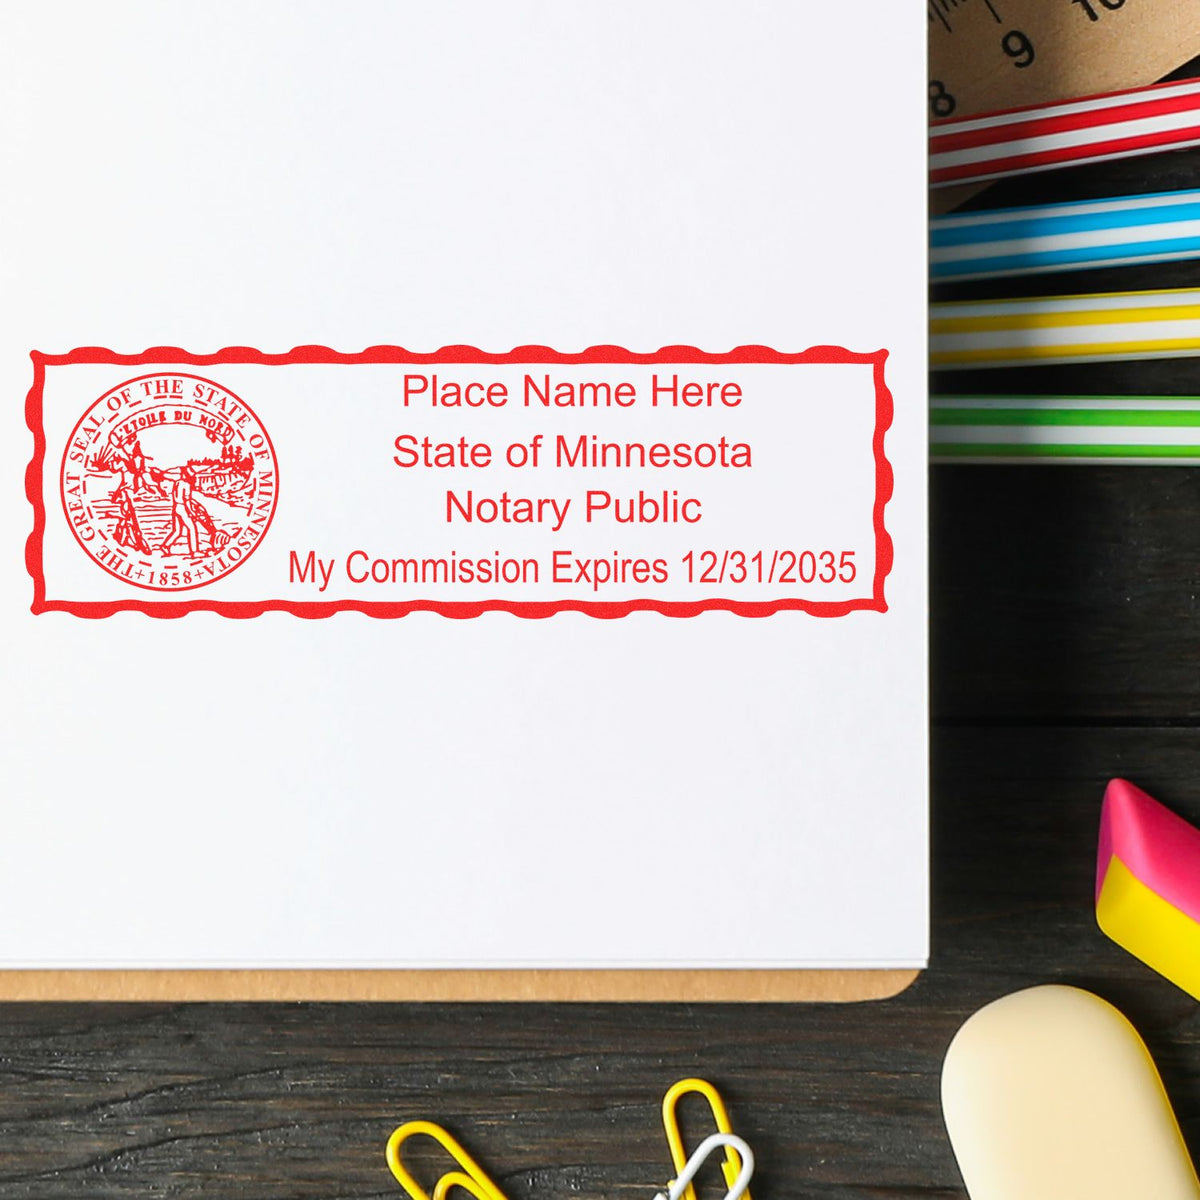 The Self-Inking State Seal Minnesota Notary Stamp stamp impression comes to life with a crisp, detailed photo on paper - showcasing true professional quality.